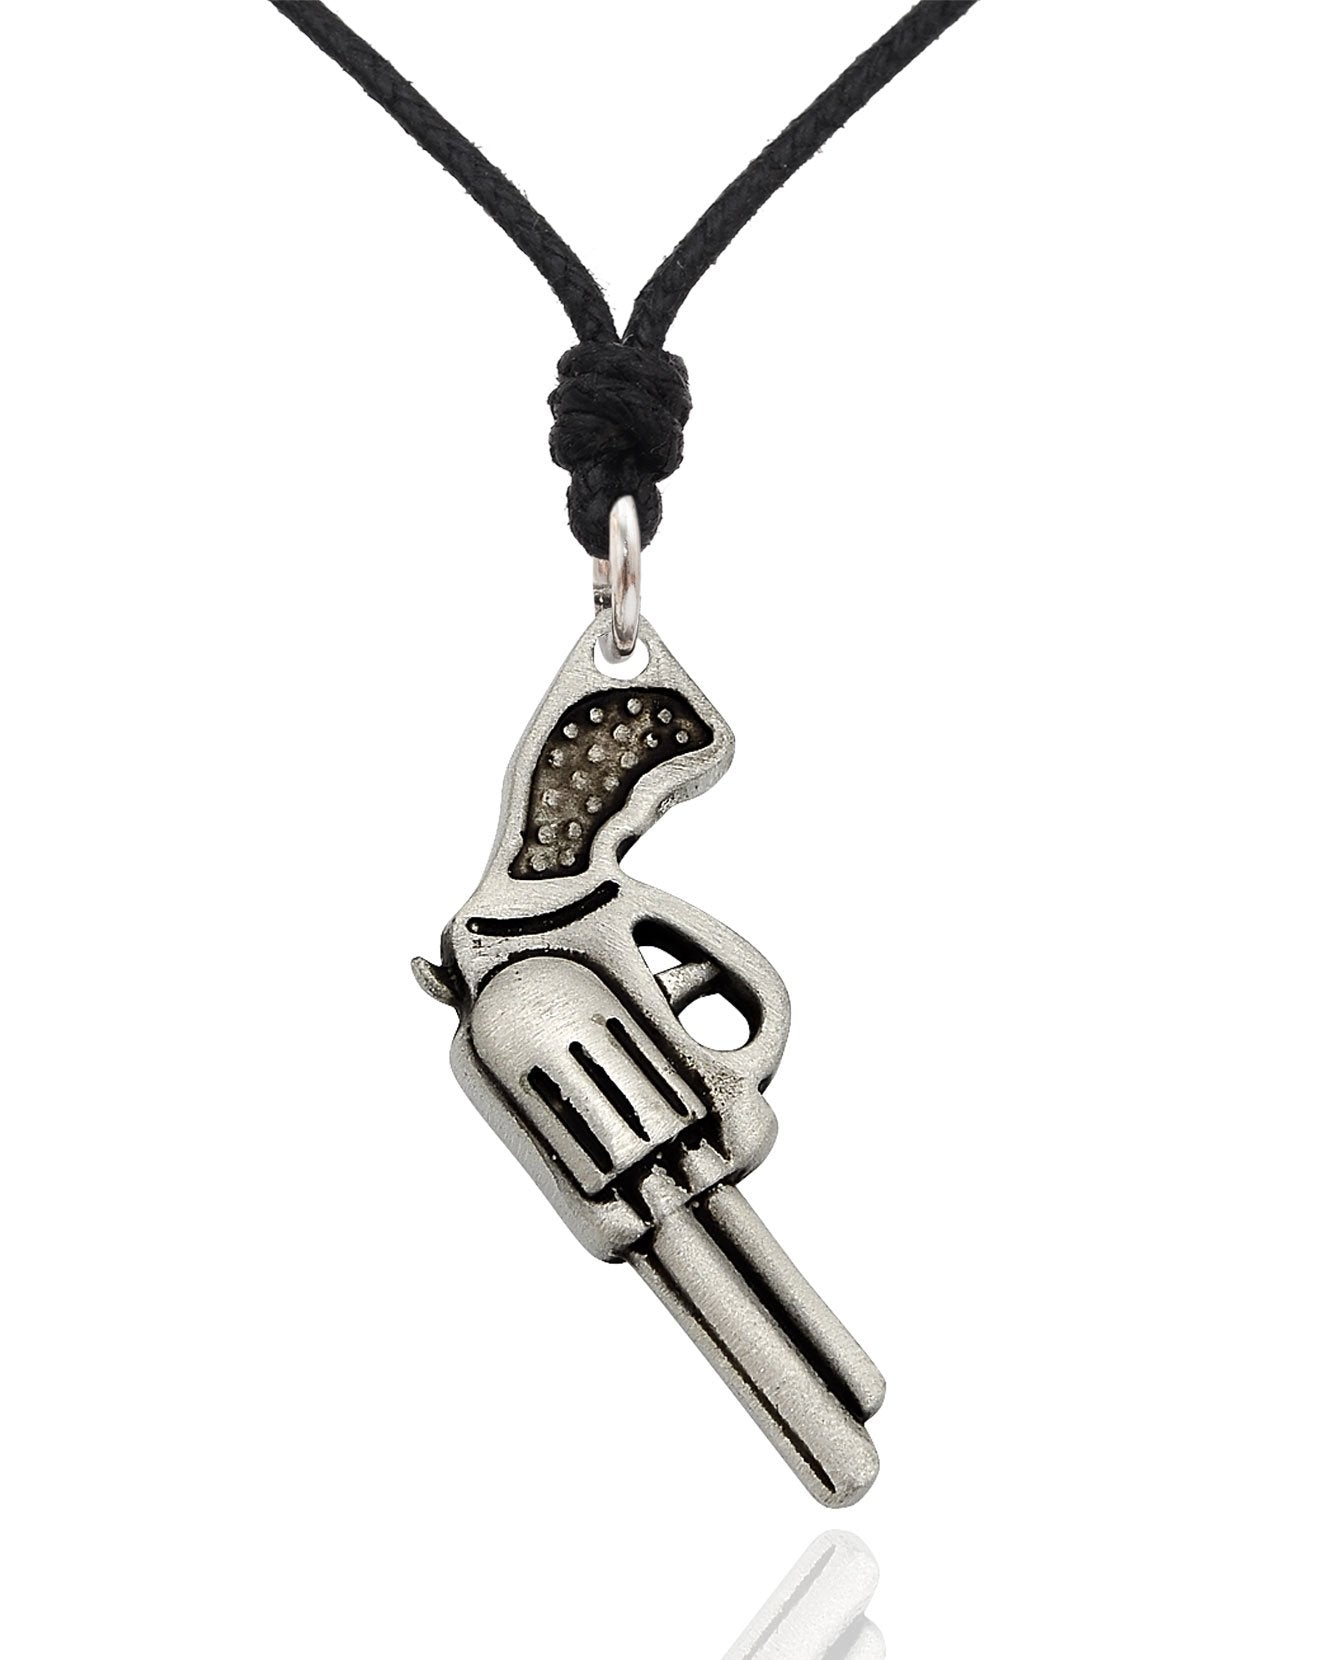 Hand Gun Pistol Silver Pewter Charm Necklace Pendant Jewelry